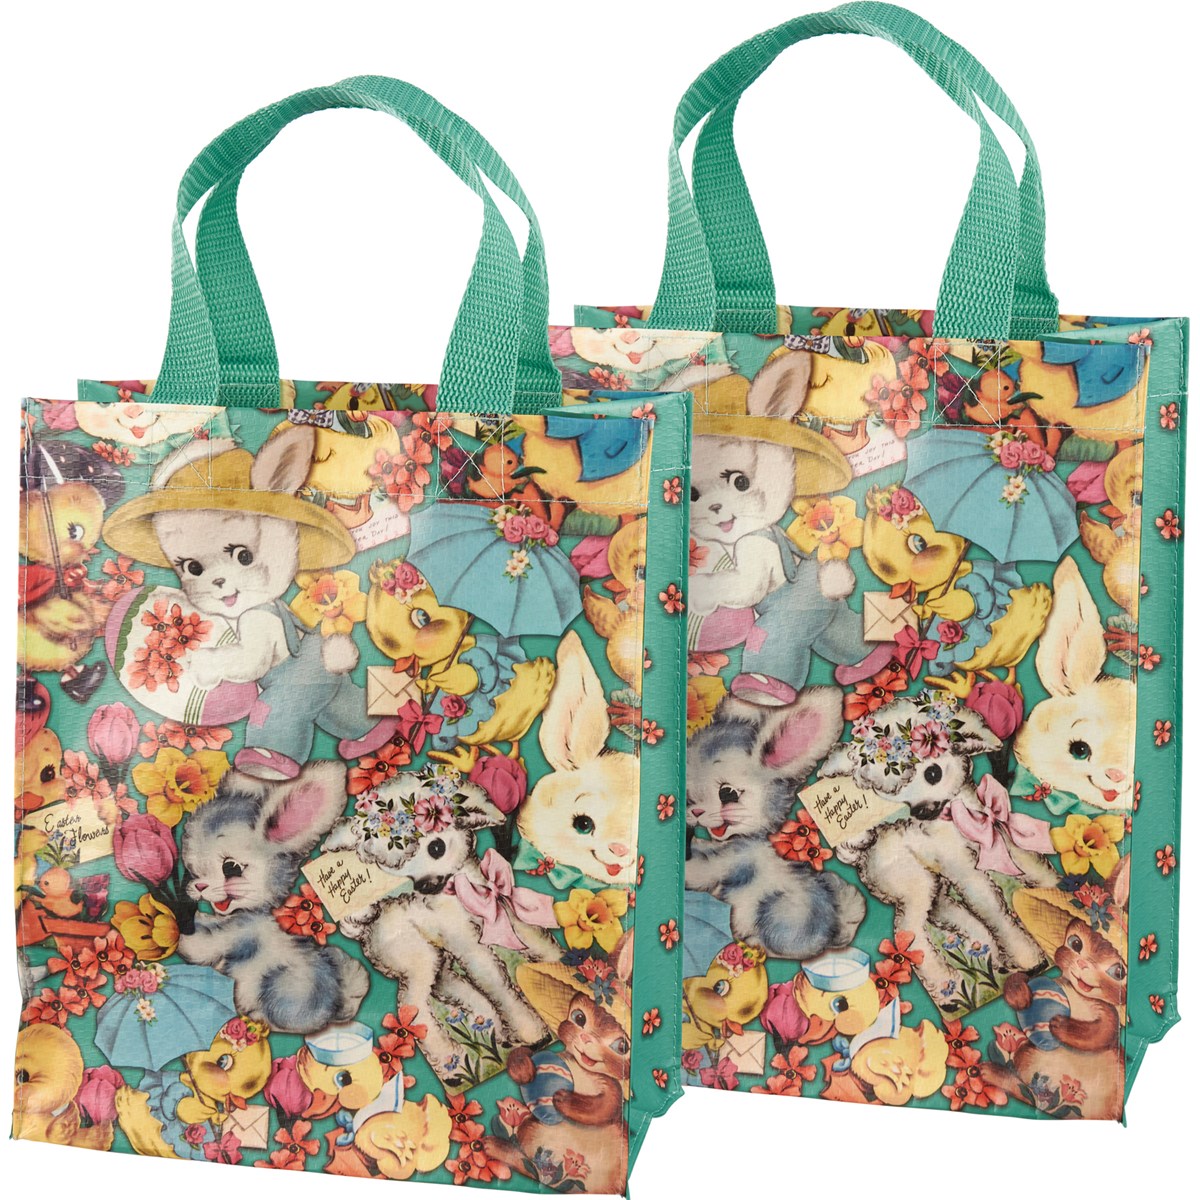 💙 Retro Easter Bunnies Lambs and Chicks Daily Reusable Market Tote